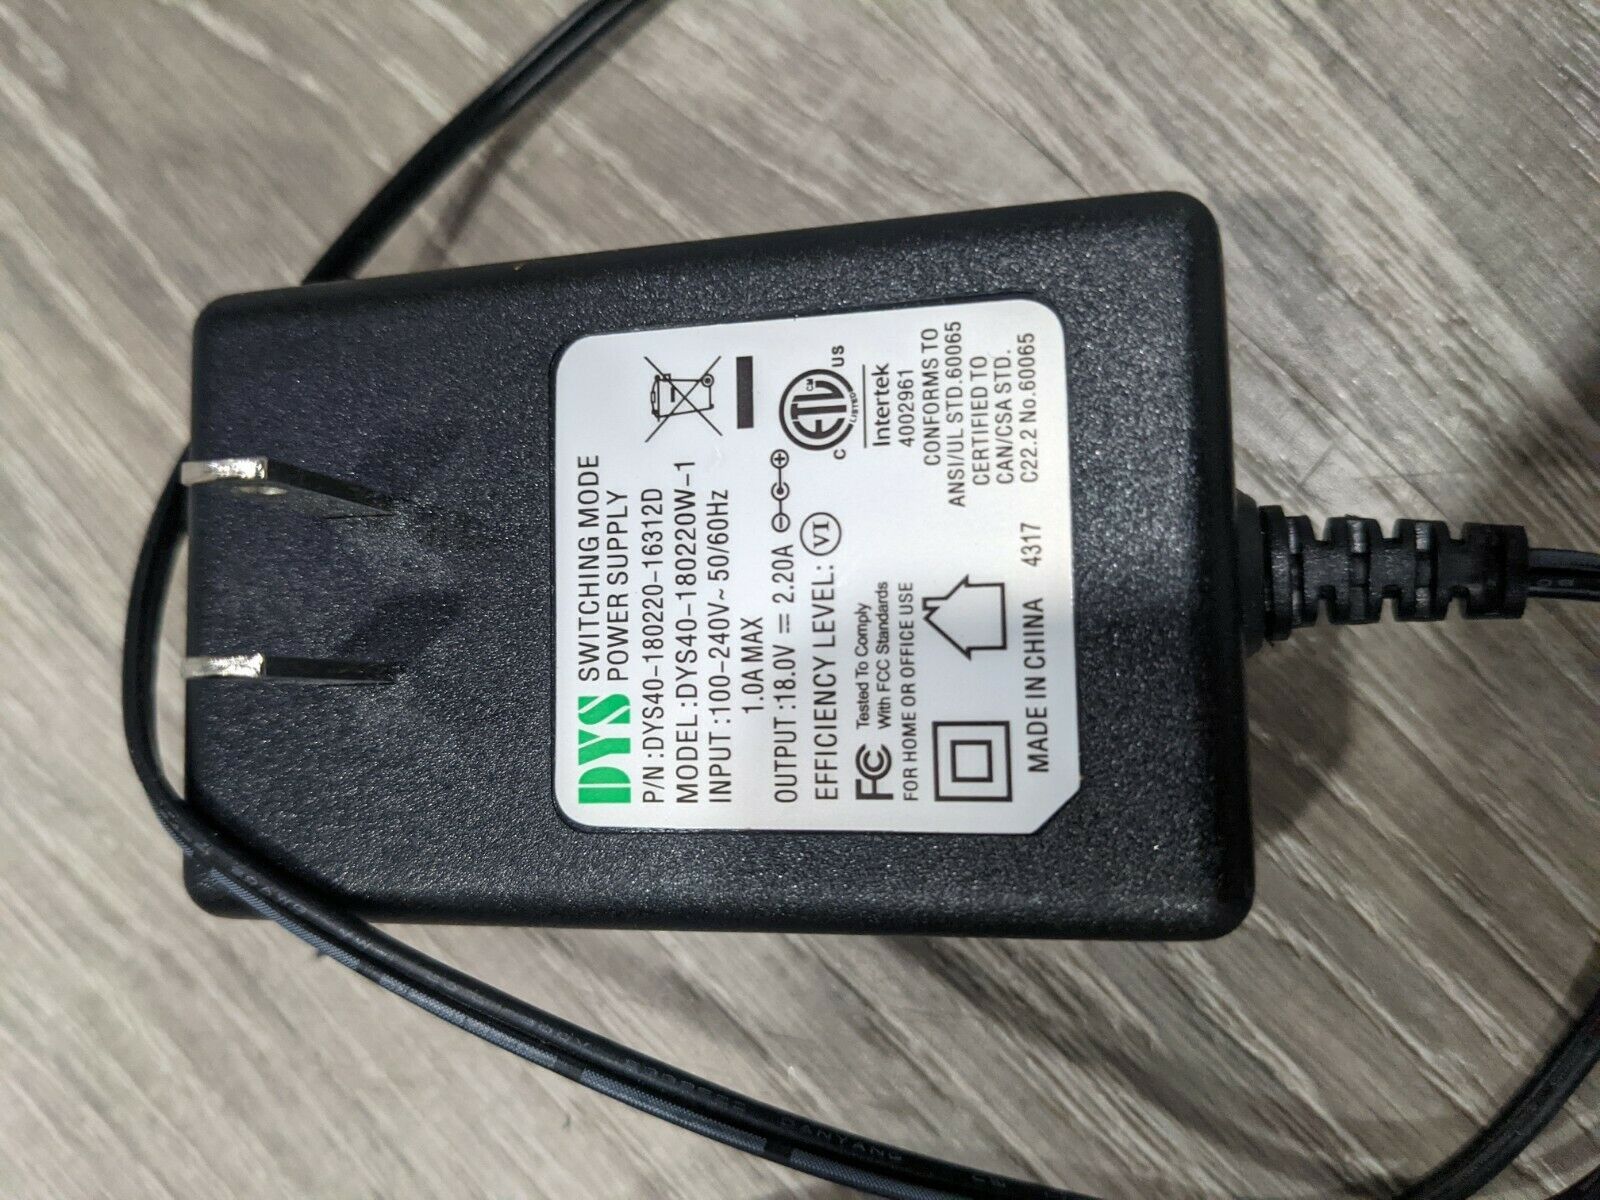 DYS switching mode Power AC Adapter P/N: DYS40-180220W-1, DYS40180220W1 Charger Compatible Brand: Universal Brand: DY